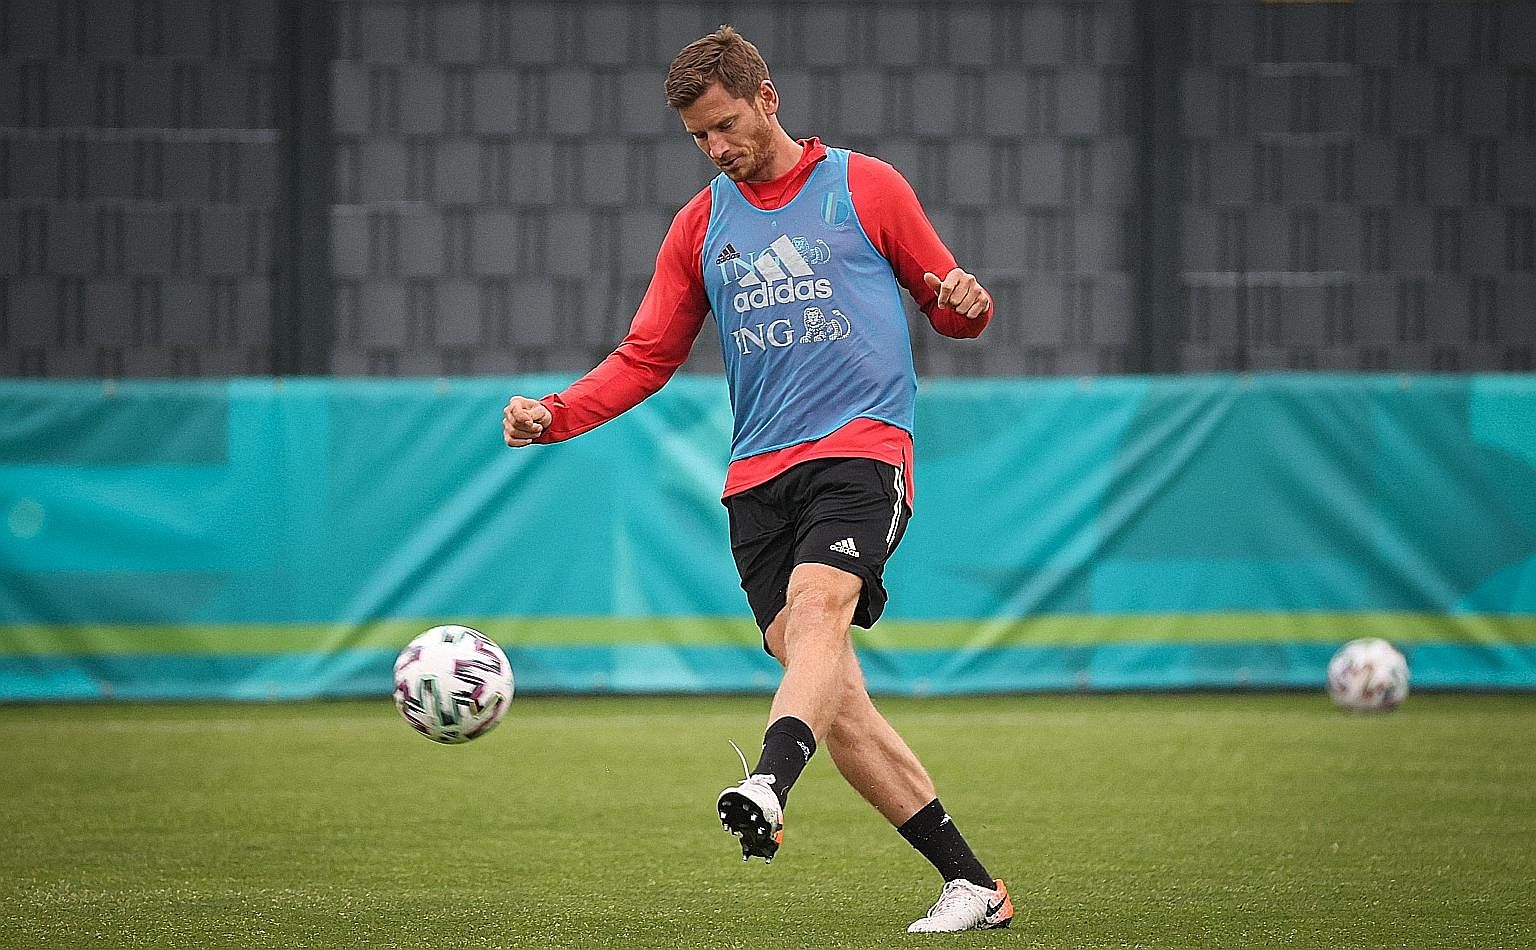 At 34, age is catching up with Belgium defender Jan Vertonghen. PHOTO: AGENCE FRANCE-PRESSE